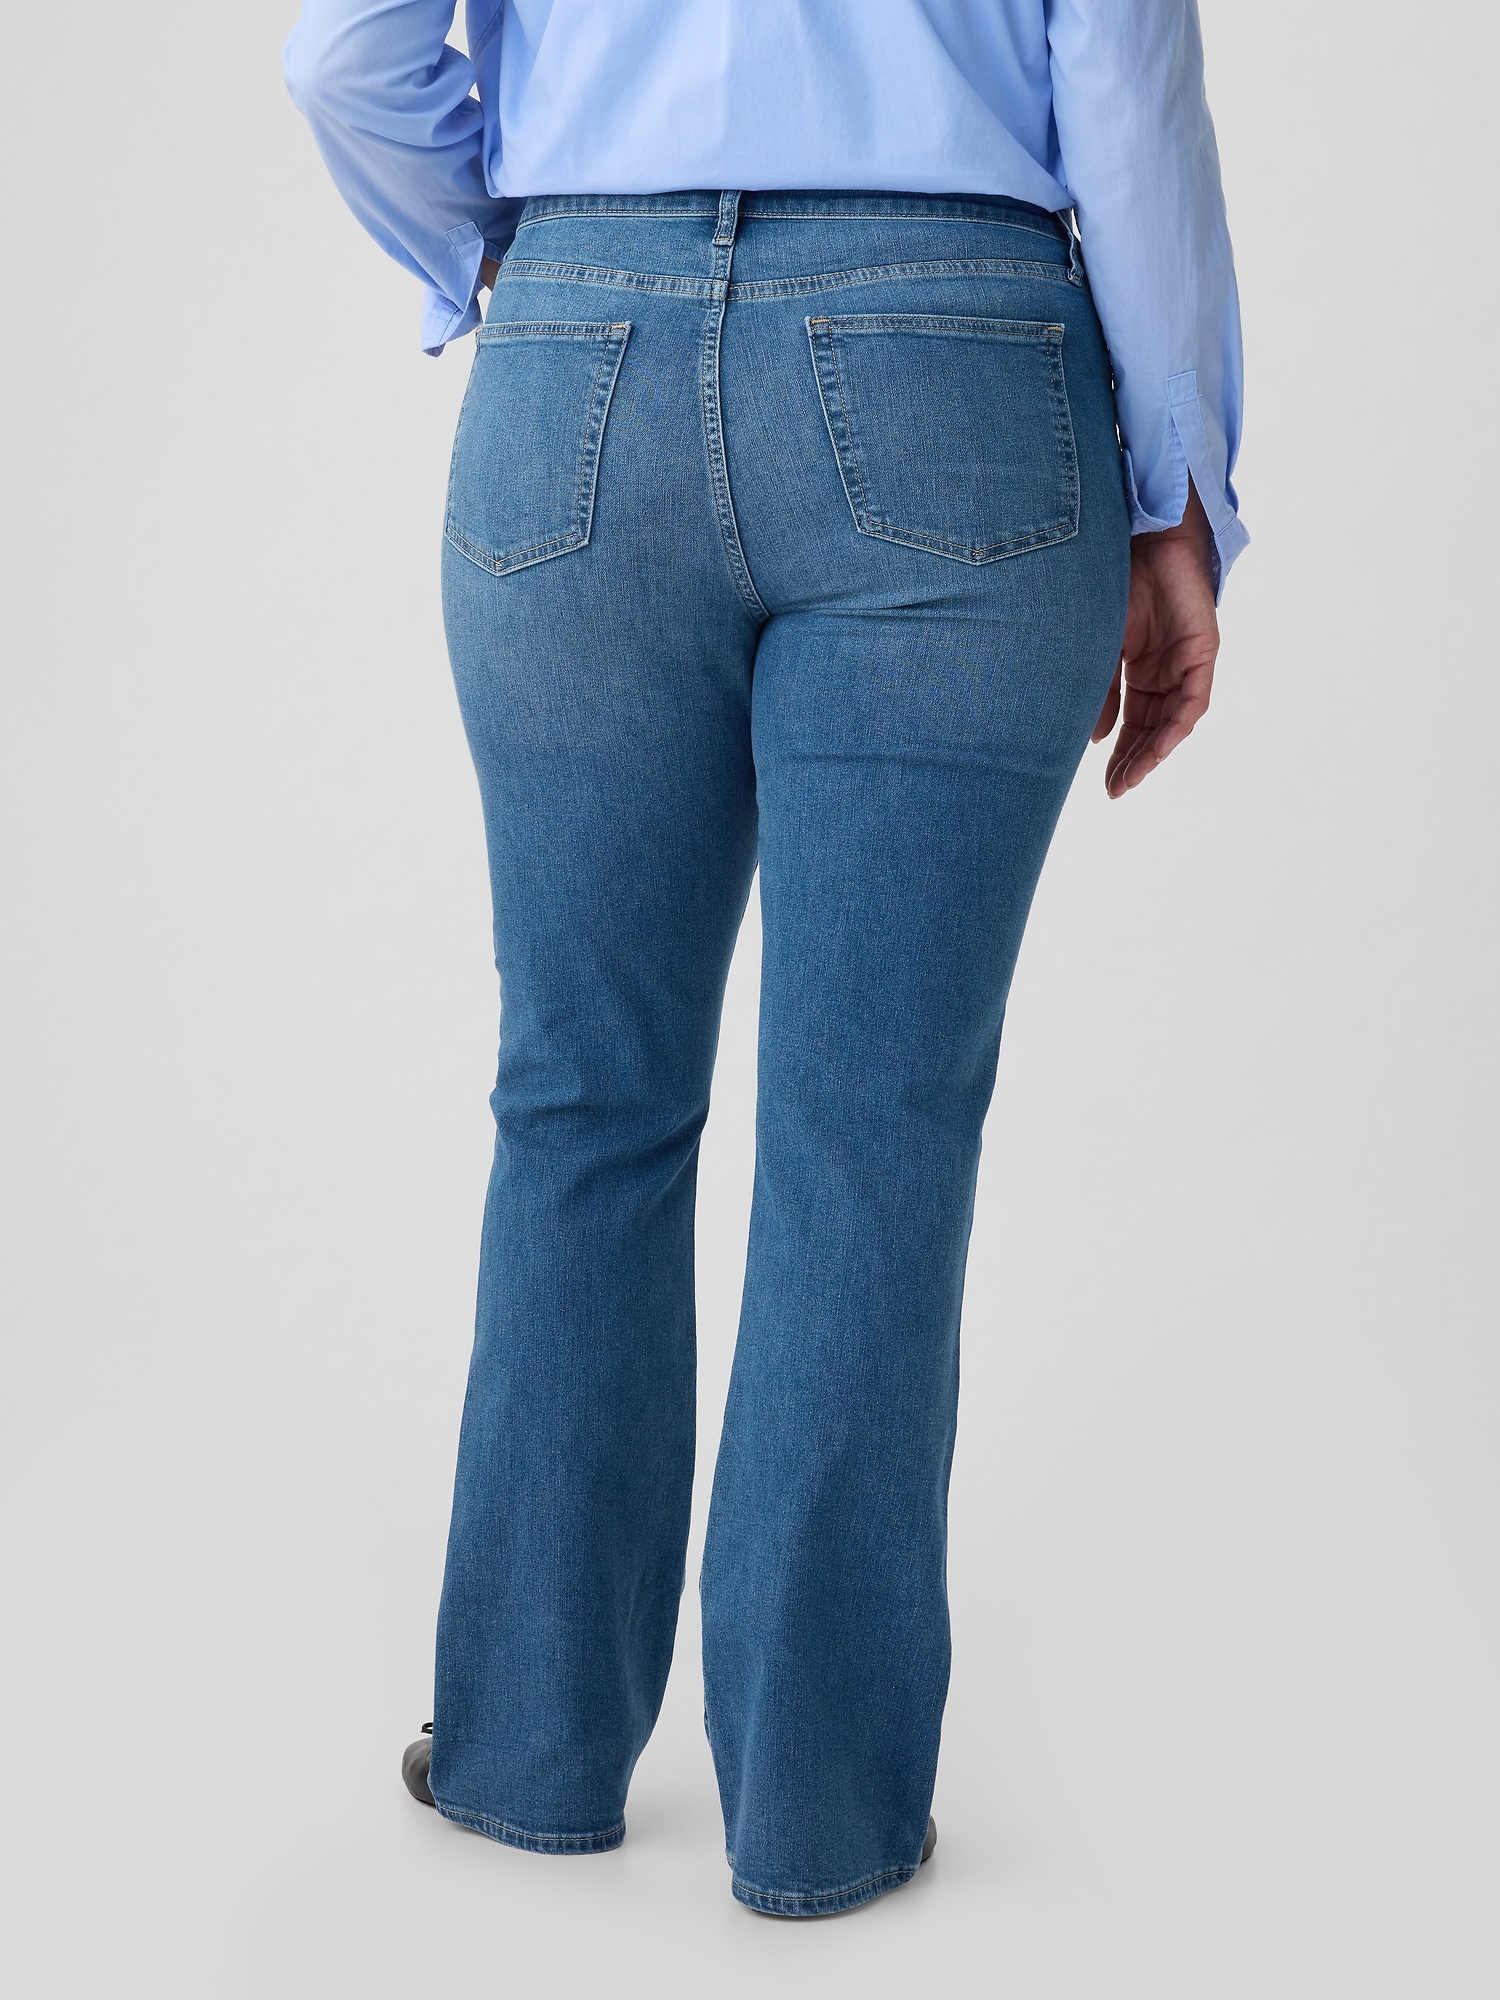 What are the right jean lengths? I am tall - 5'11, and its hard